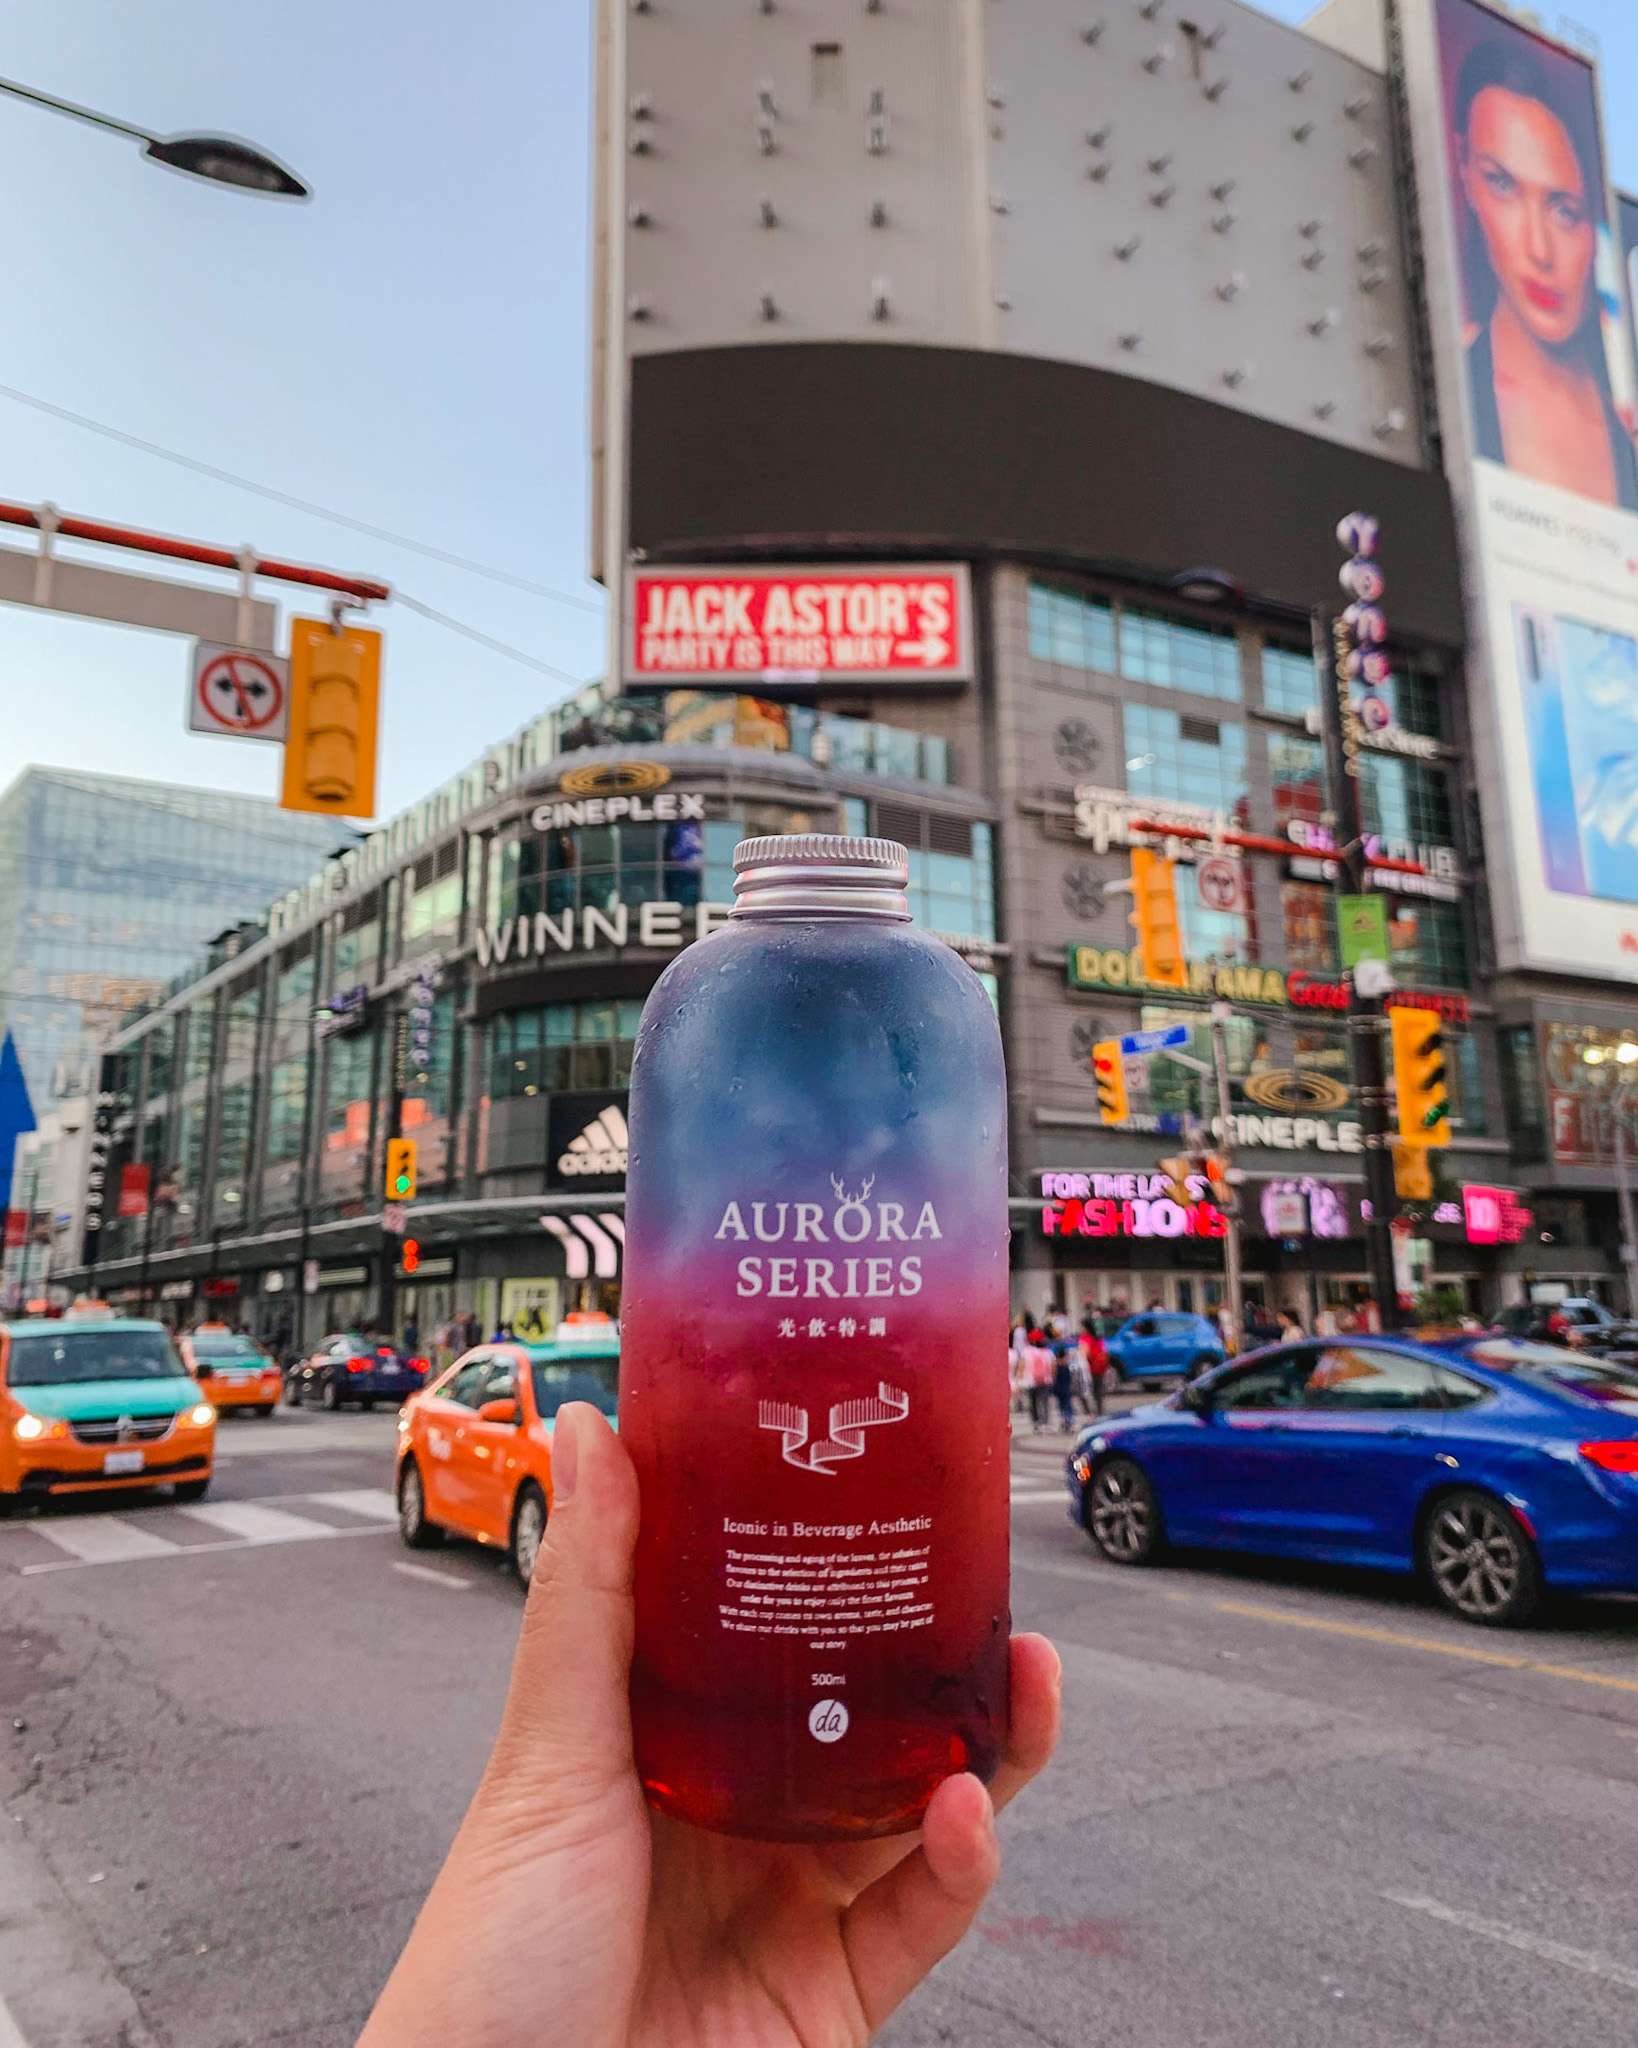 The Alley bubble tea in downtown Toronto at Yonge-Dundas Square